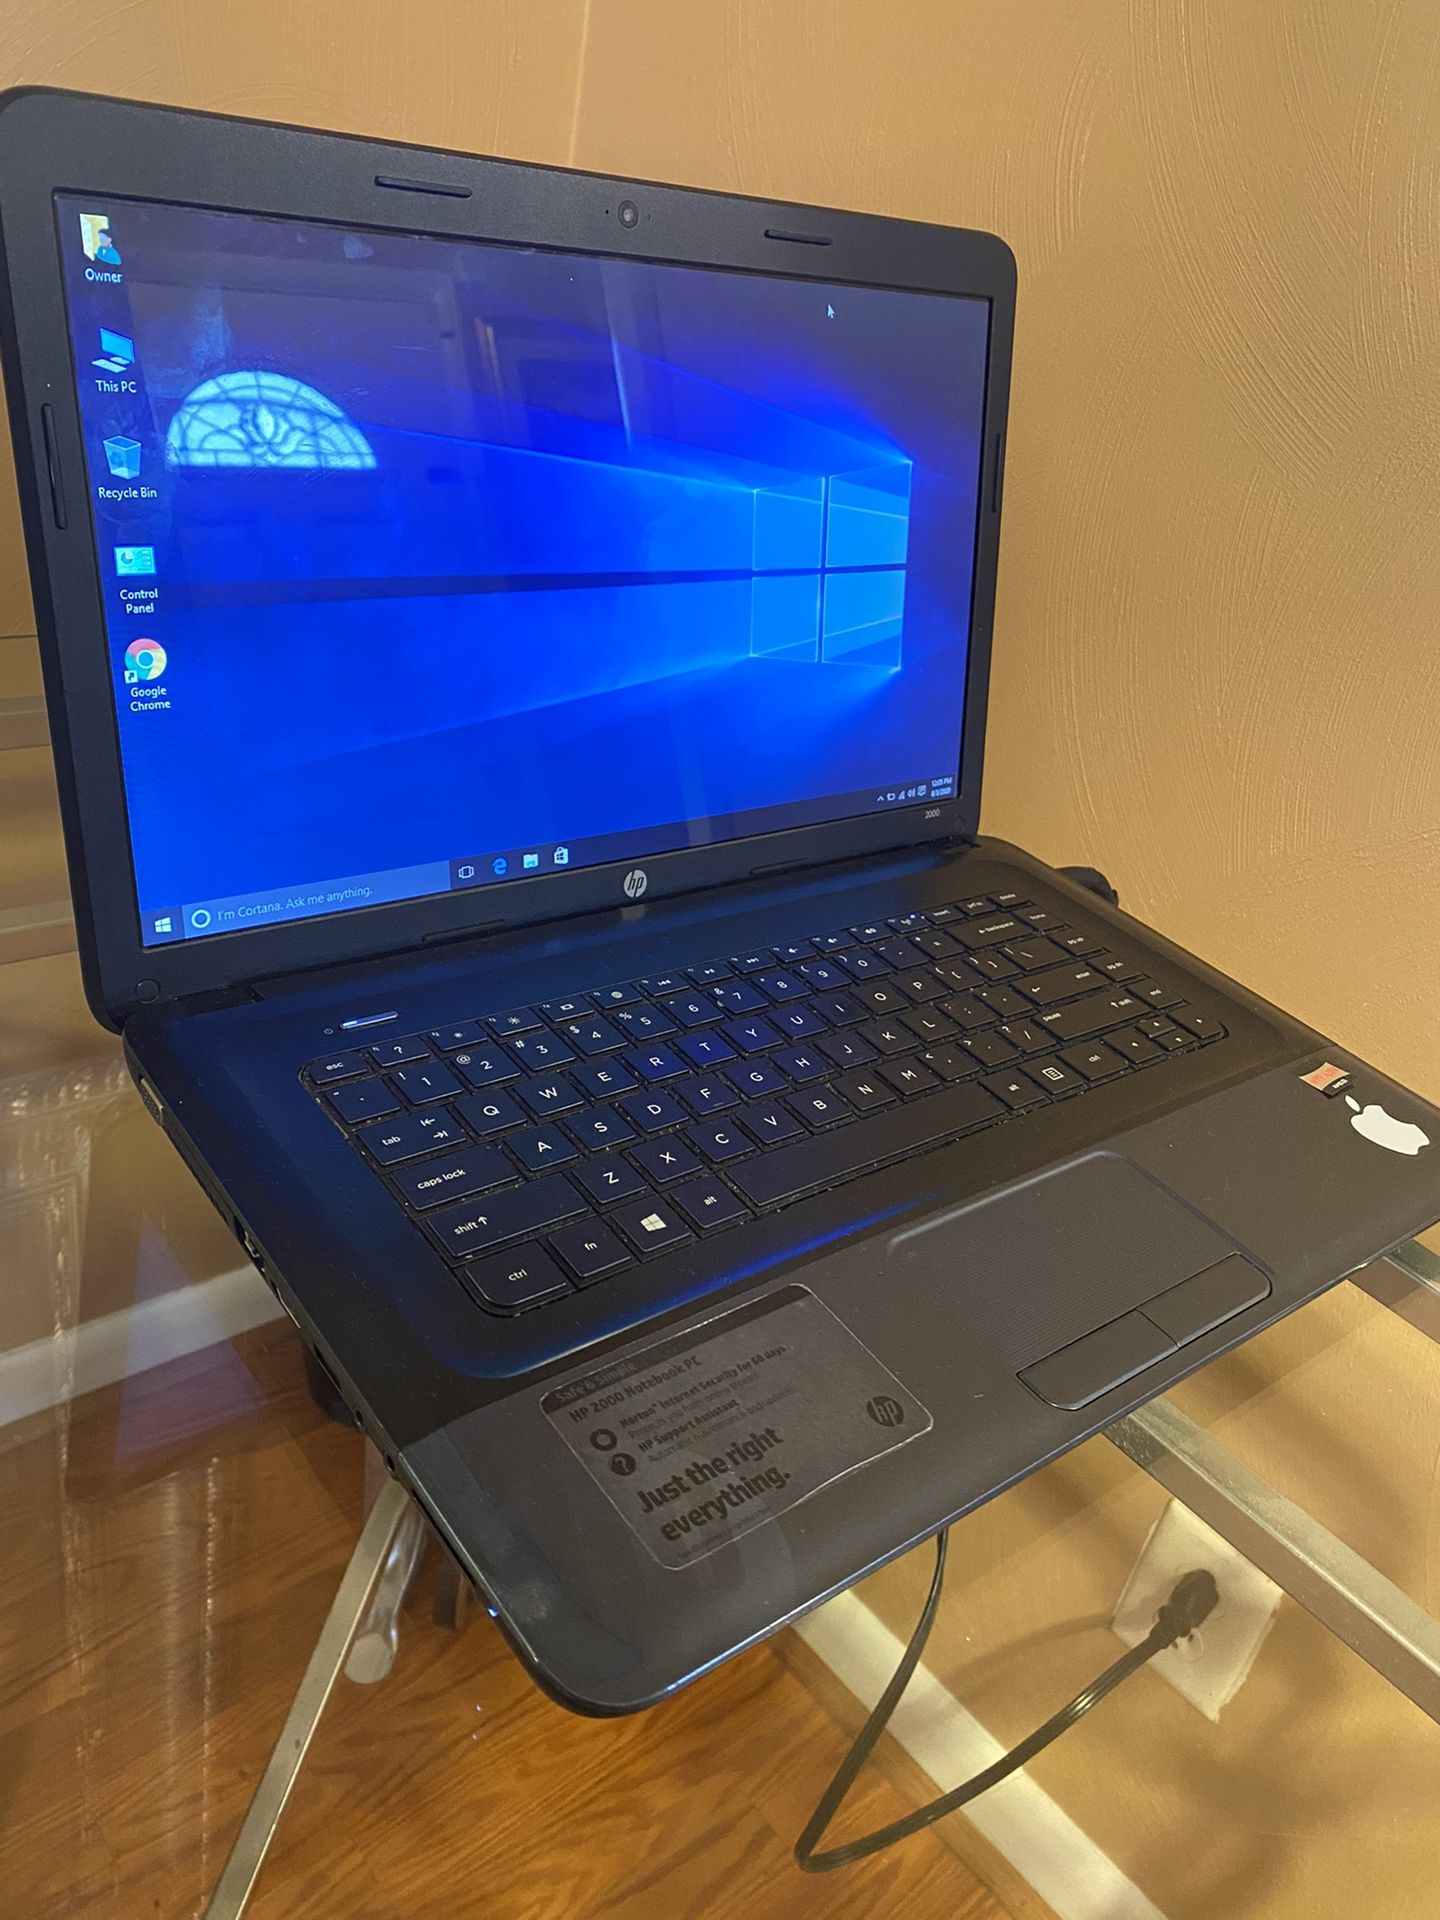 HP 2000 notebook PC (Windows 10 pro, MS office 2007 professional suite) HDMI, VGA